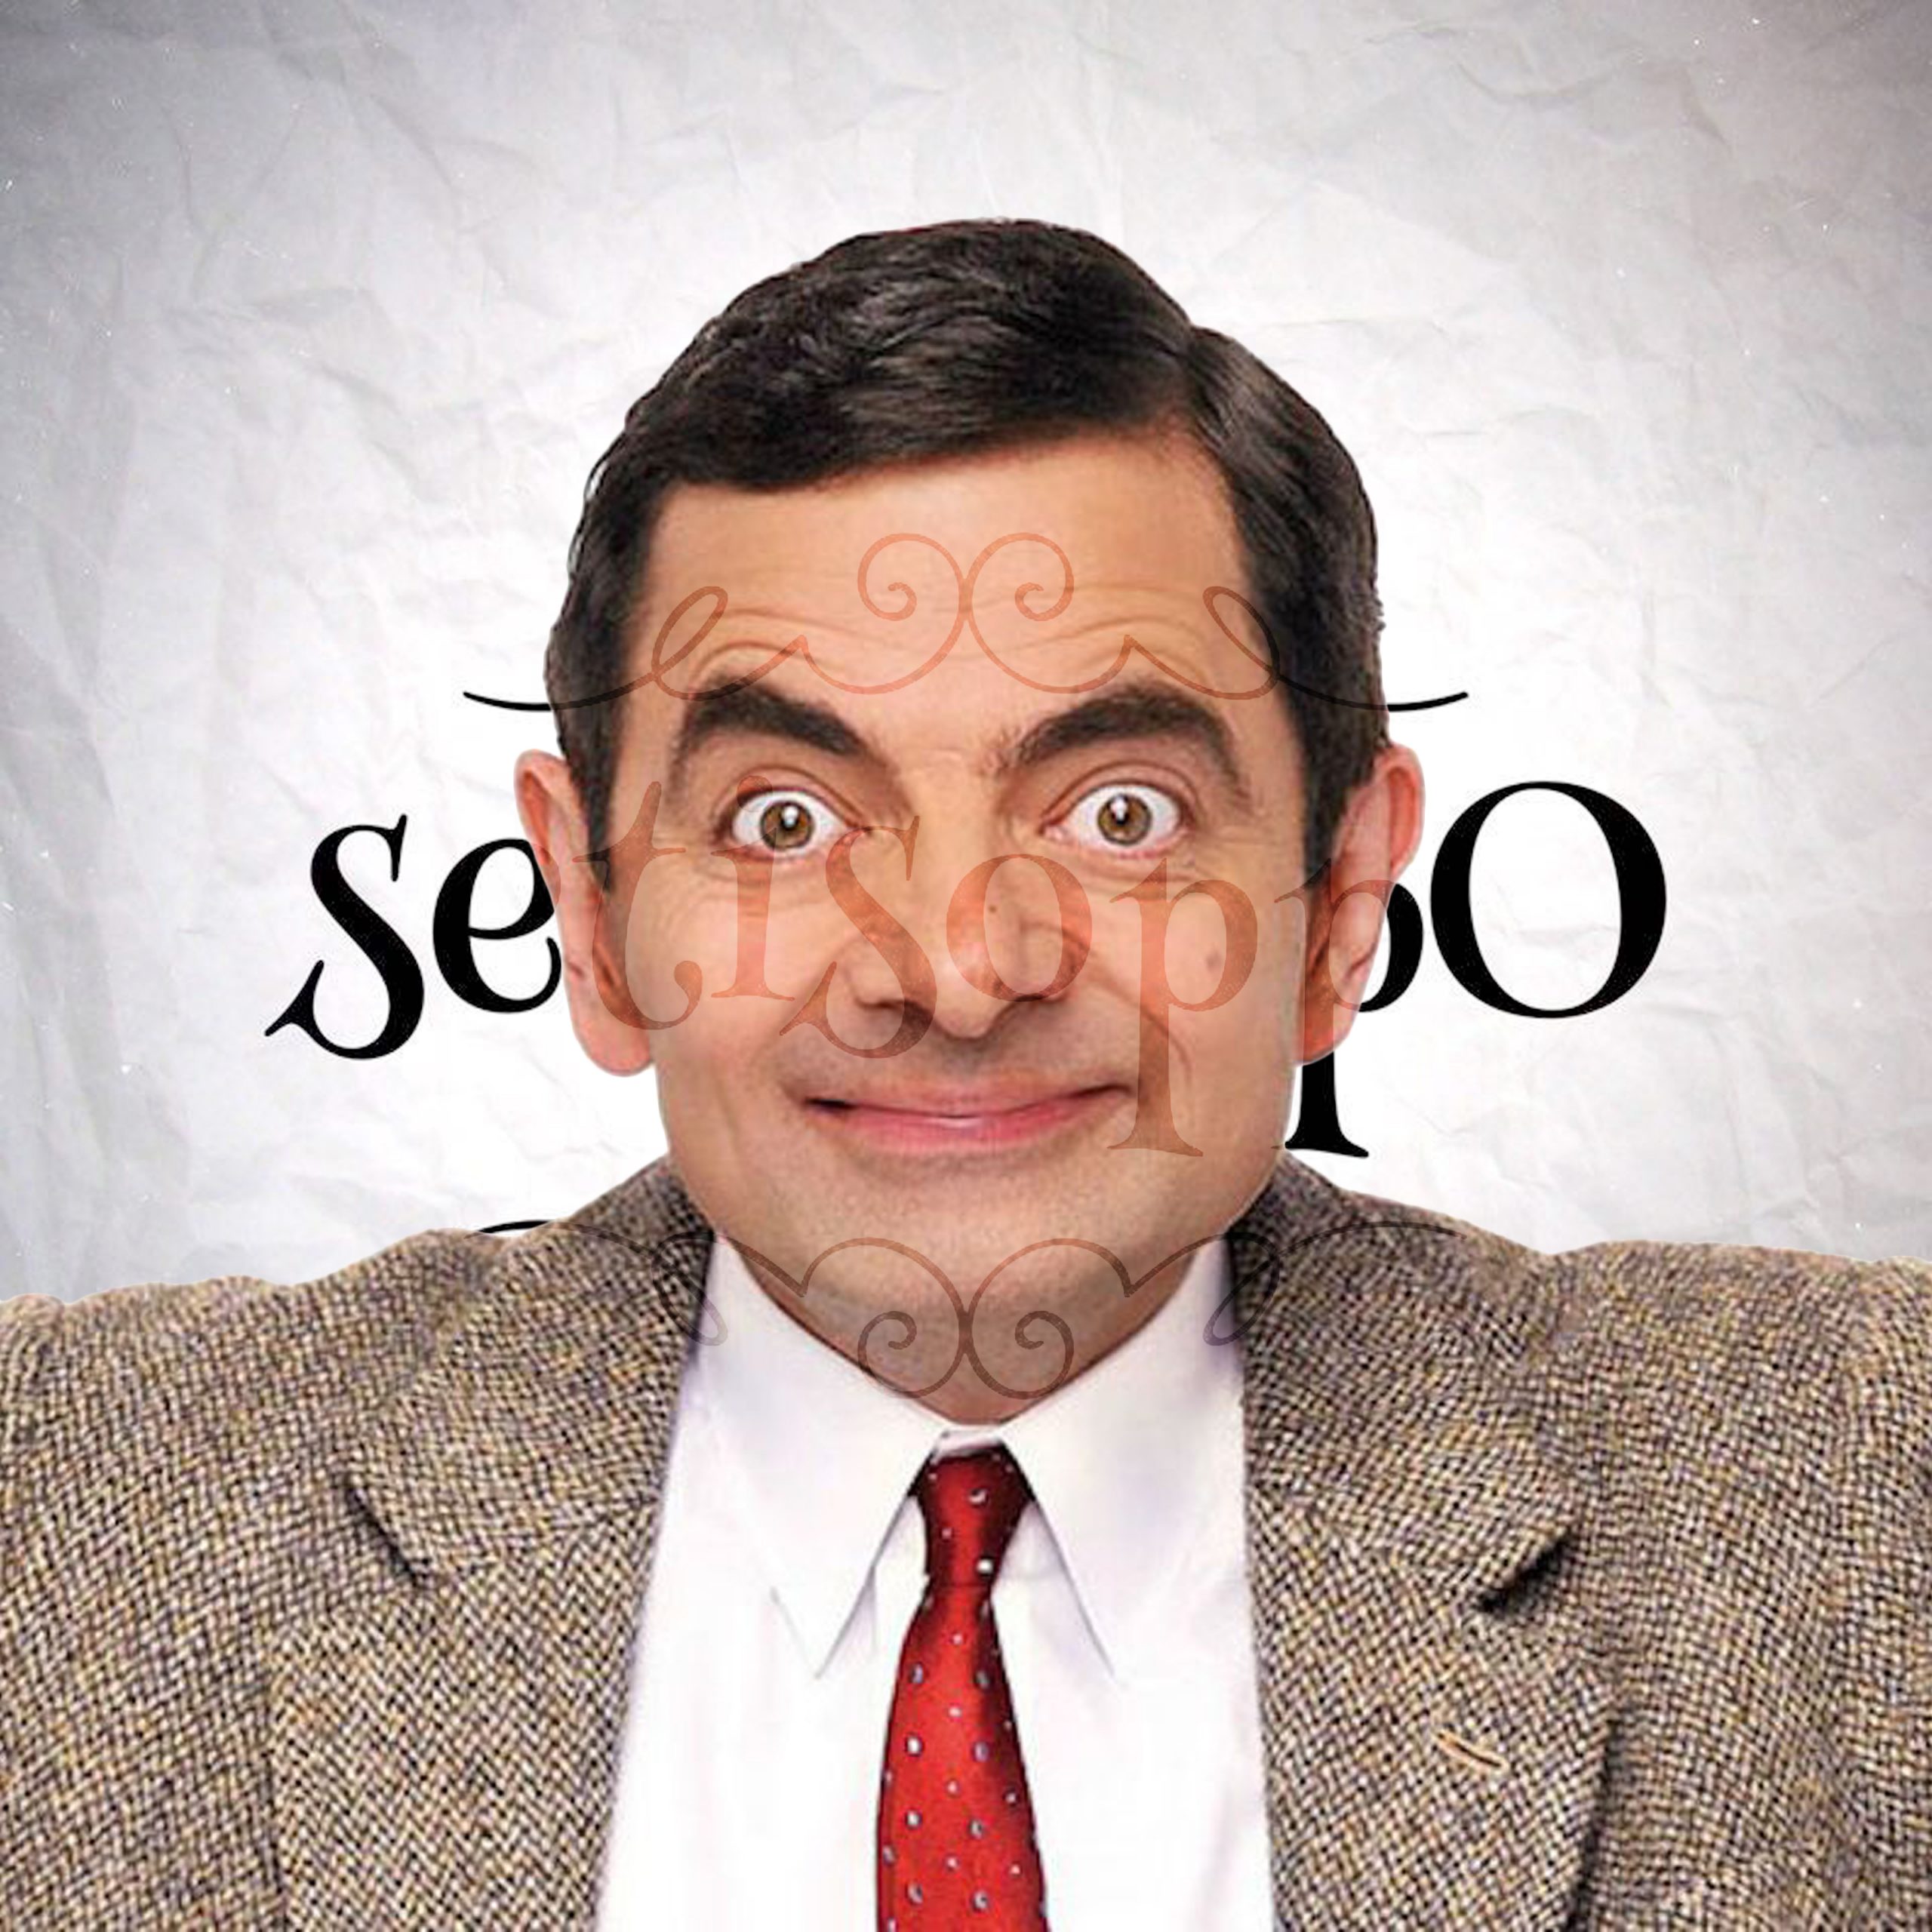 What’s The Opposite Of Mr Bean?